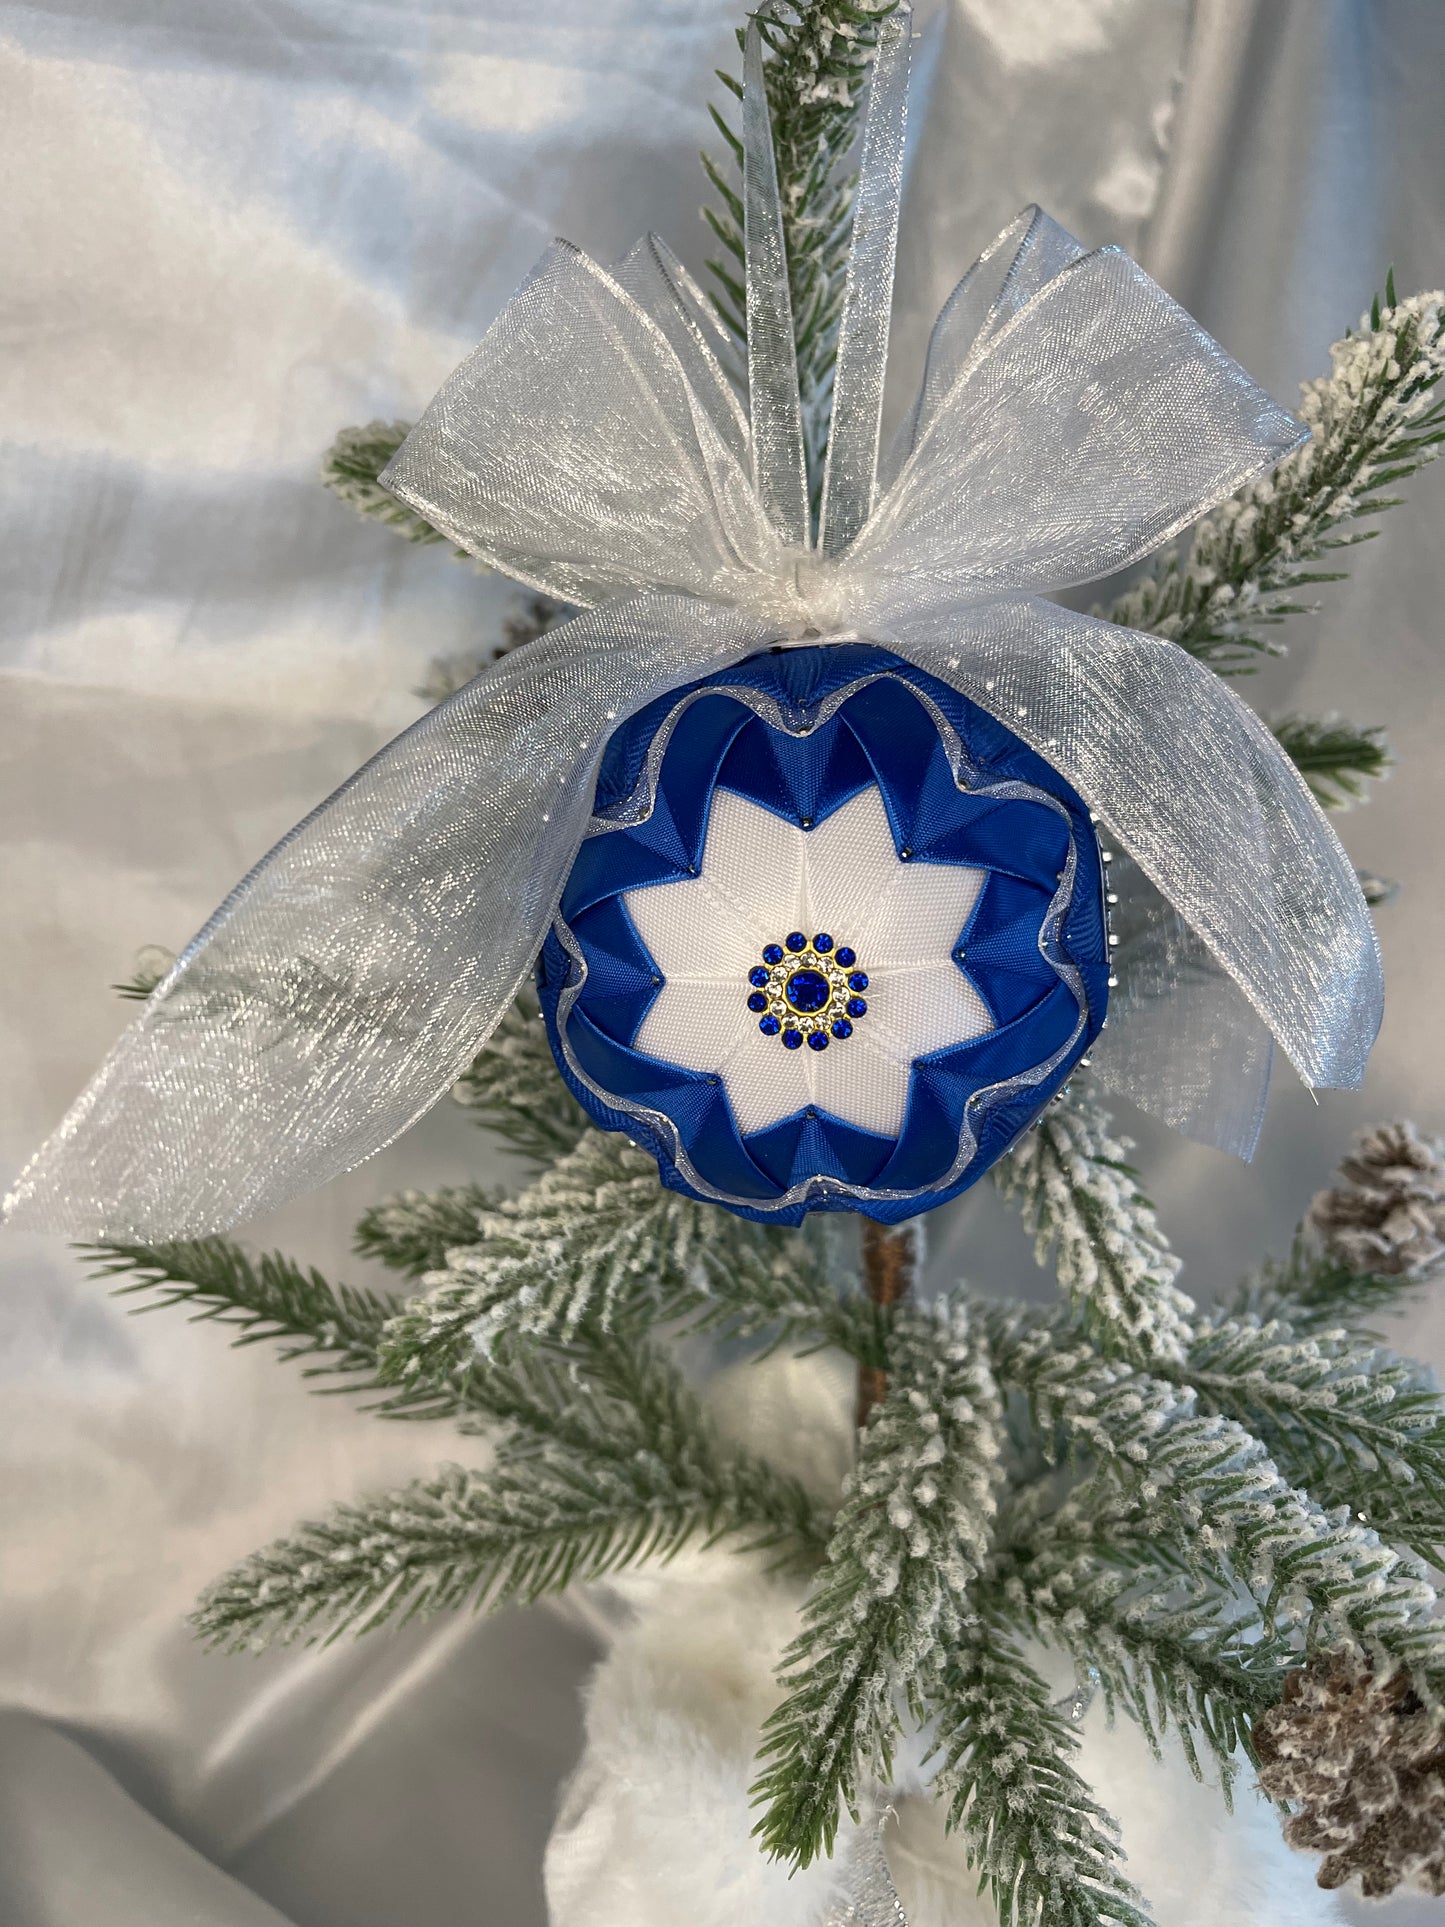 Handcrafted ornaments for any occasions